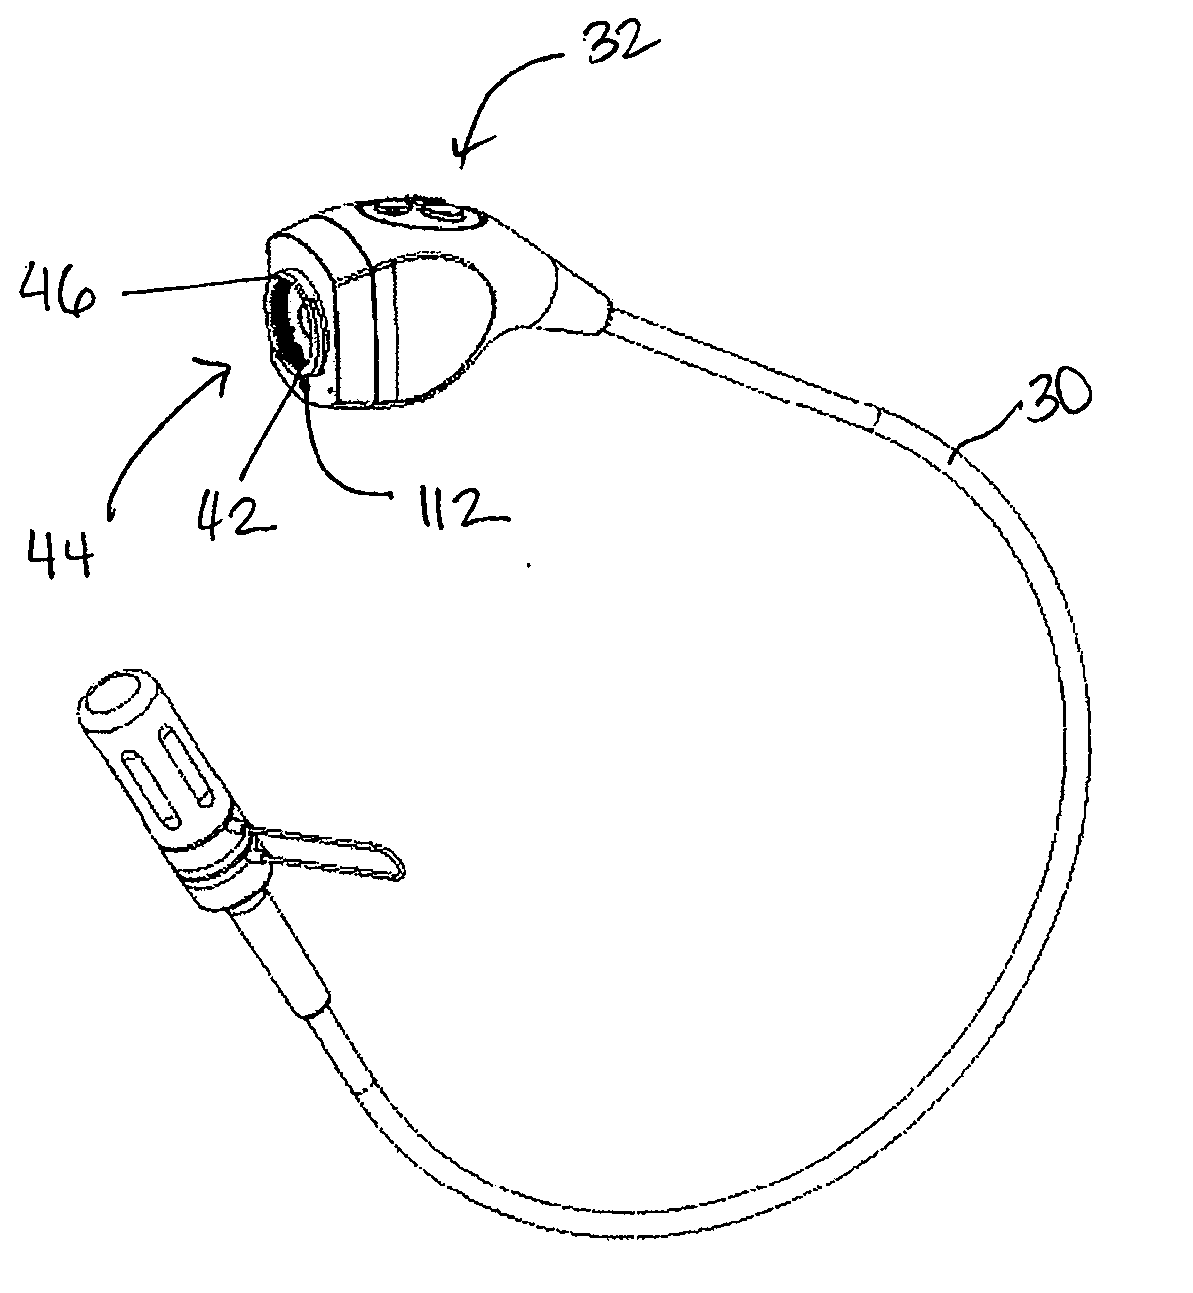 Disposable Sheath for Use with an Imaging System